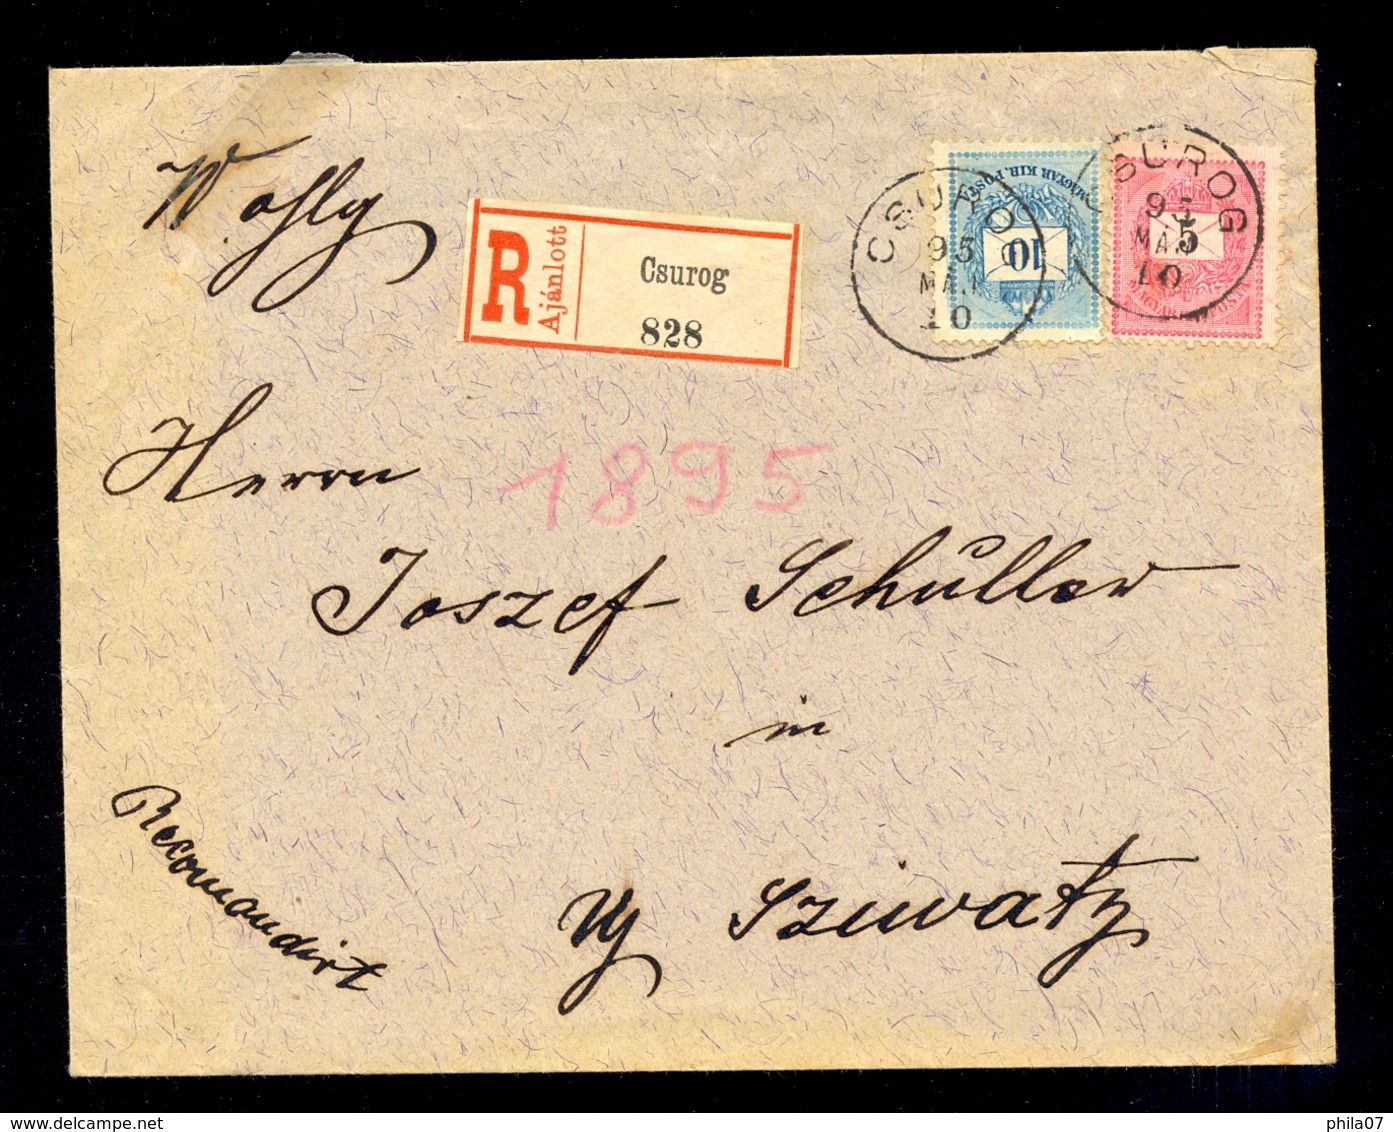 Serbia - Letter Sent By Registered Mail From Čuruga 10.05. 1895. Excellent Quality Of Cancels, Arrival On The Reverse. - Serbie